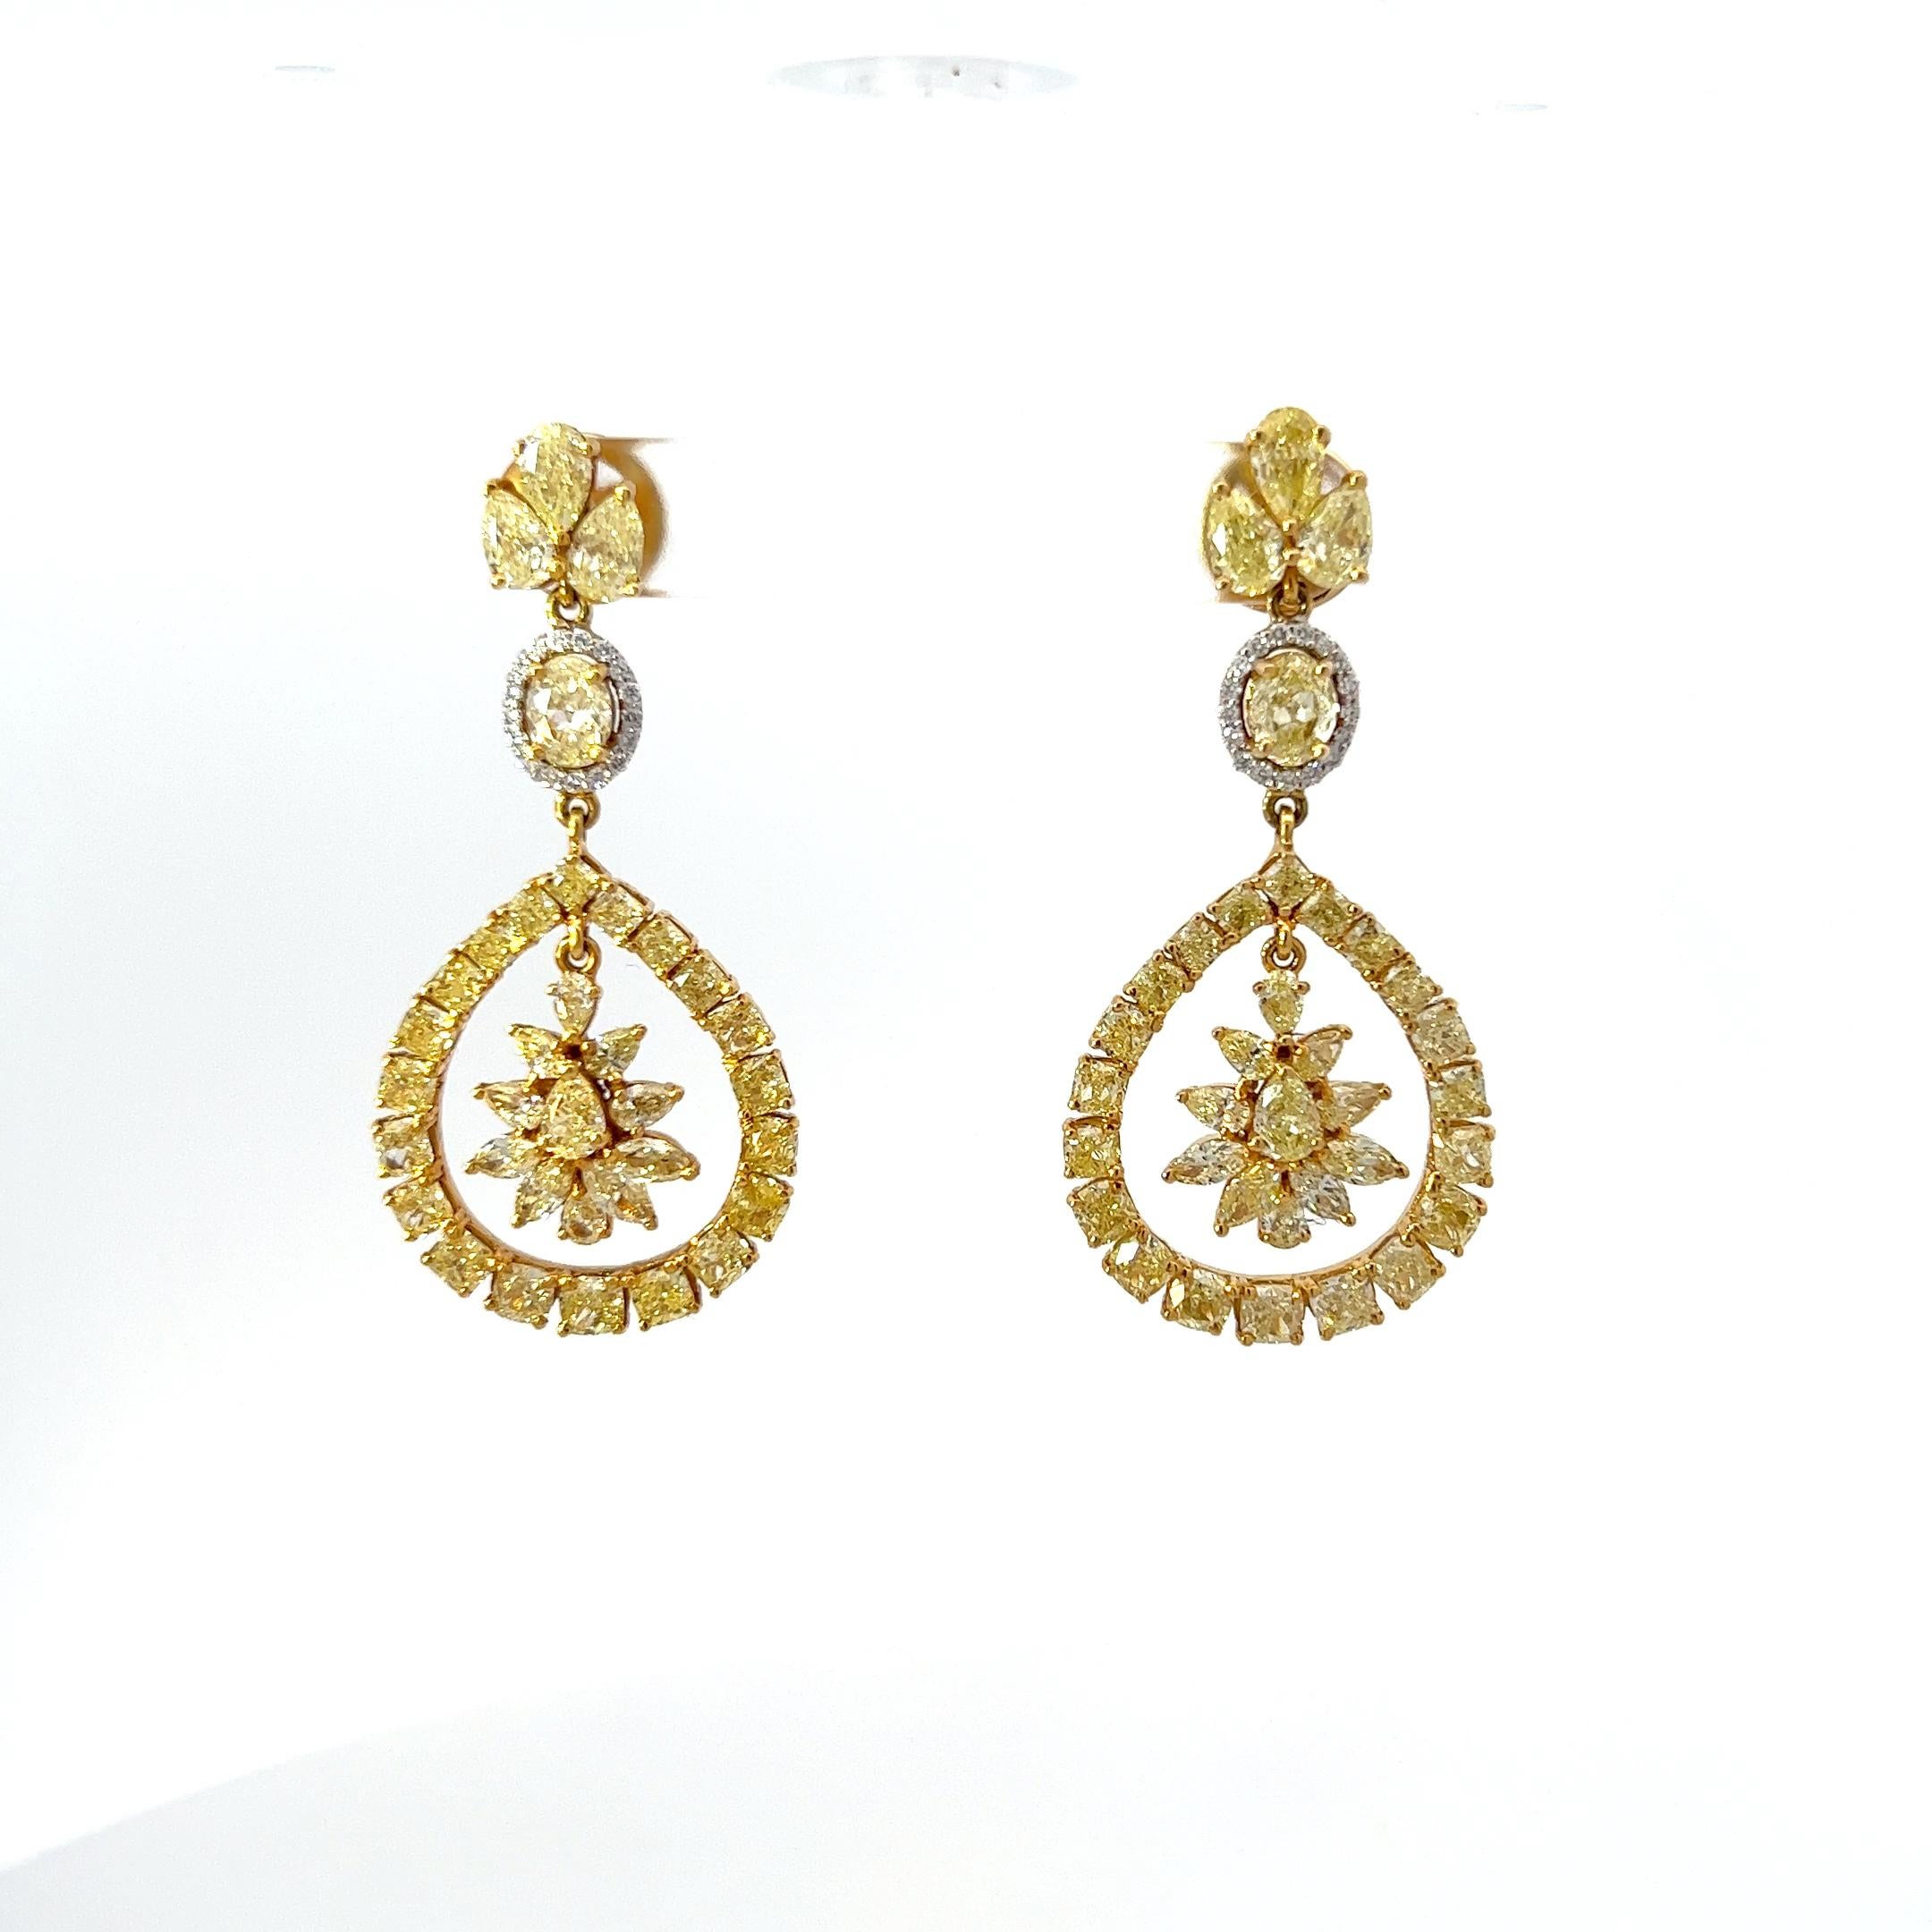 Indulge in the splendor of these enchanting earrings, a true celebration of luxury and artistic finesse. Crafted in 18K yellow gold, each earring features an exquisite array of fancy yellow diamonds, totaling an astounding 11.45 carats. These rare